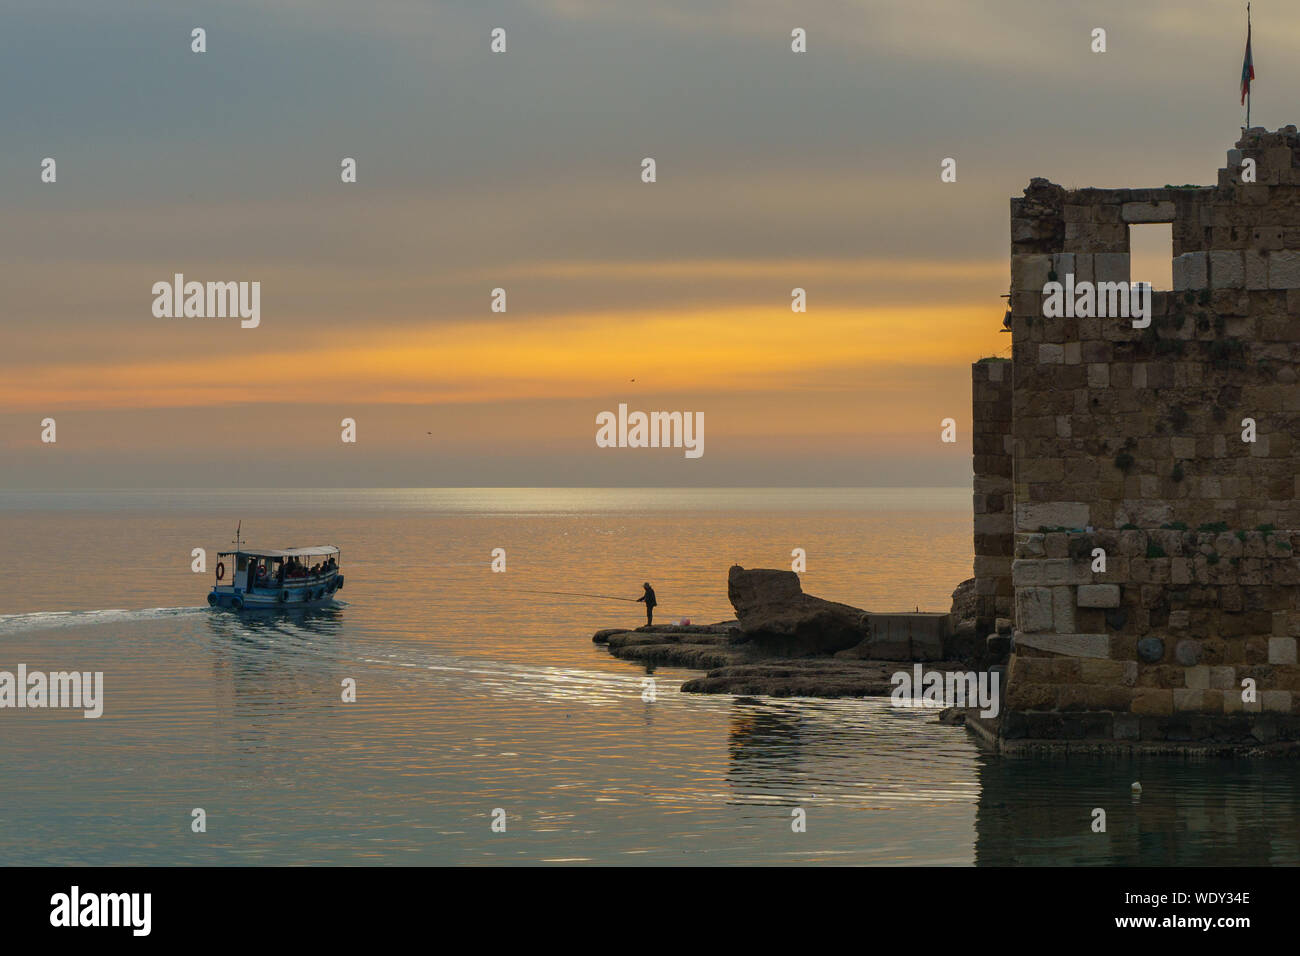 A man fishing near a tourist boat at sunset in Byblos harbour Lebanon 5 february 2018 Stock Photo